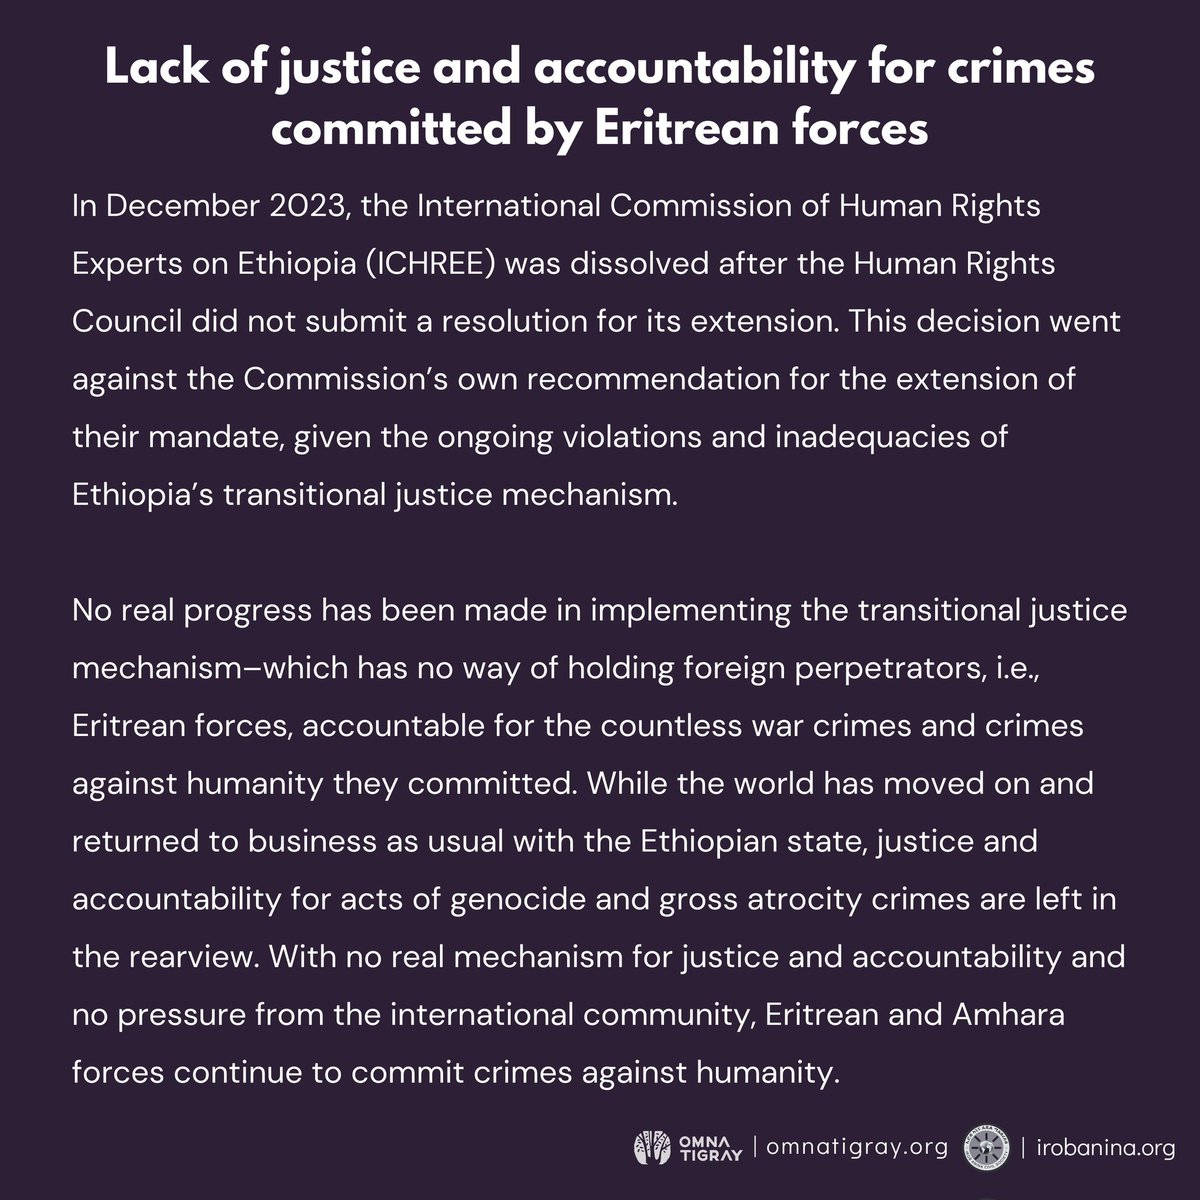 In Dec 2023,@UN_HRC's #ICHREE was dissolved.Since then,significant progress hasn't been made in implementing Ethiopia's transitional justice mechanism–which has no way of holding 🇪🇷/n forces accountable for countless war crimes & crimes against humanity.#Justice4Tigray @UN @POTUS